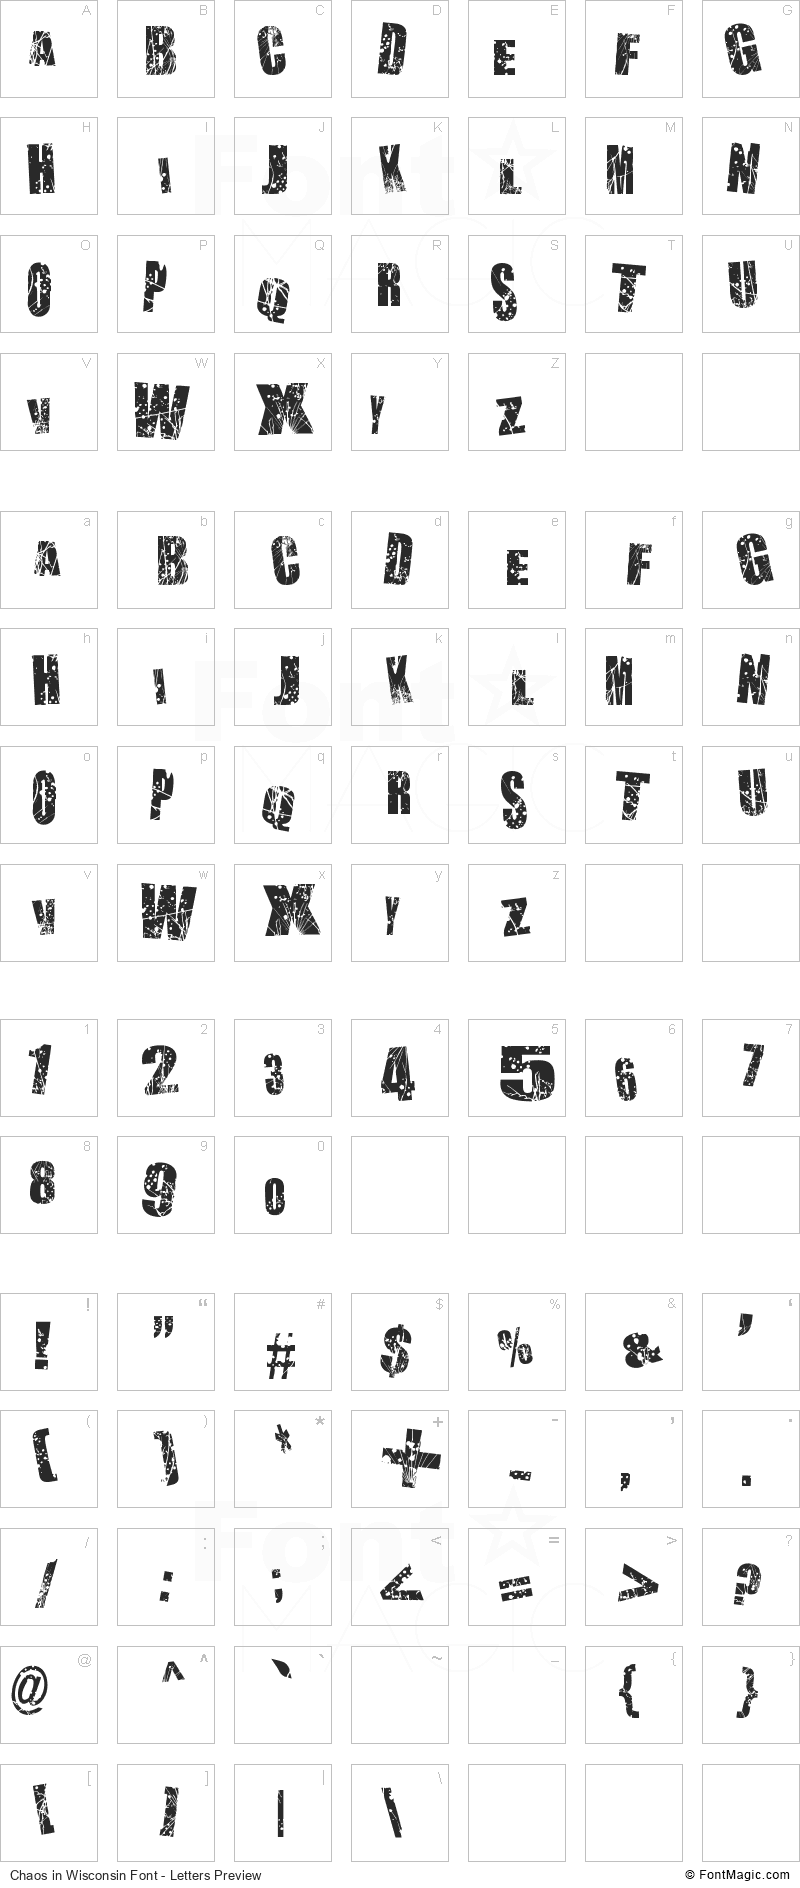 Chaos in Wisconsin Font - All Latters Preview Chart